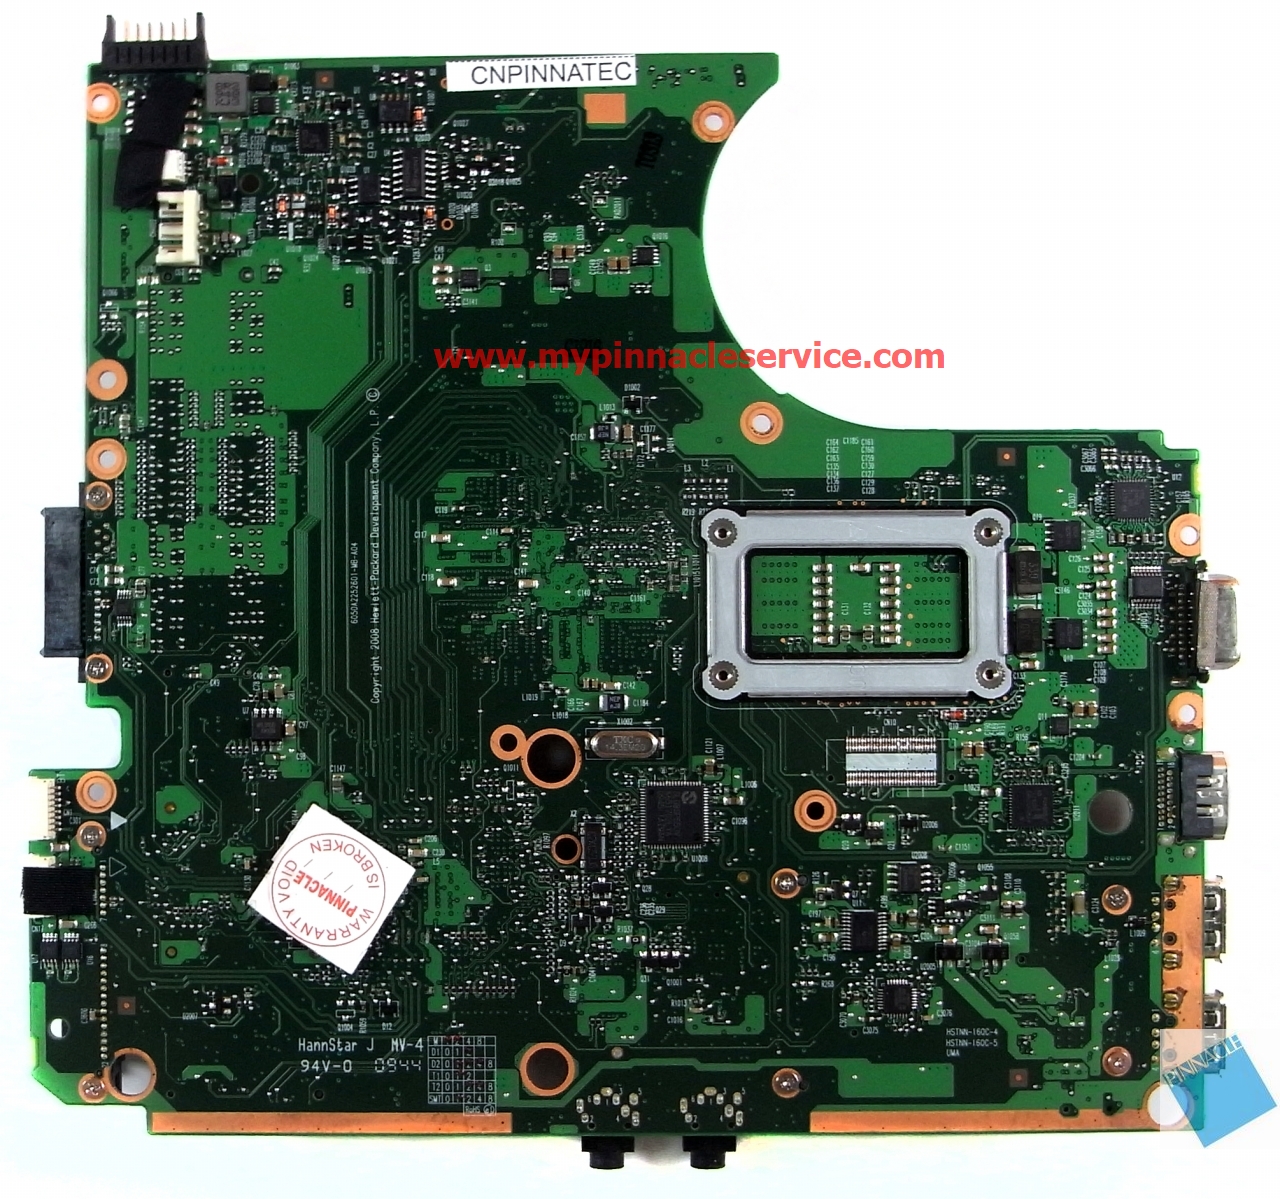 574509-001-motherboard-for-hp-compaq-4510s-4311s-4411s-4410s-6050a2252601-rimg0009.jpg